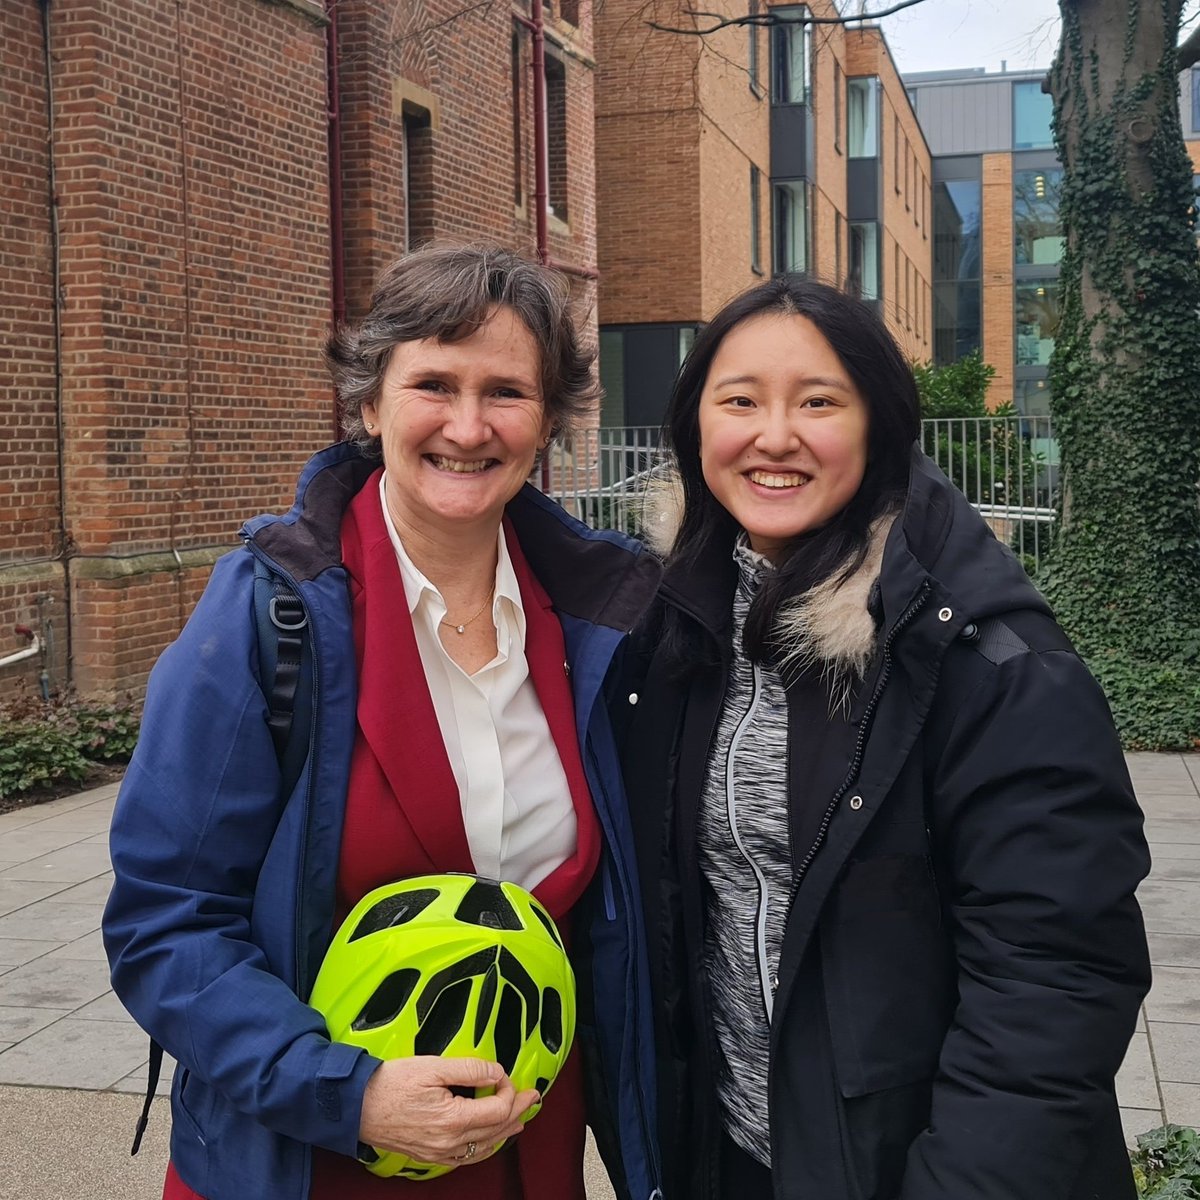 Last Saturday was the International Day of Women and Girls in Science!

For this, I'd like to give a shoutout to @UniofOxford's new Vice-Chancellor. She is #OxfordUni's 2nd female chief executive in  800 years, a neuroscientist and biochemist. 
Read more: shorturl.at/ceFNZ